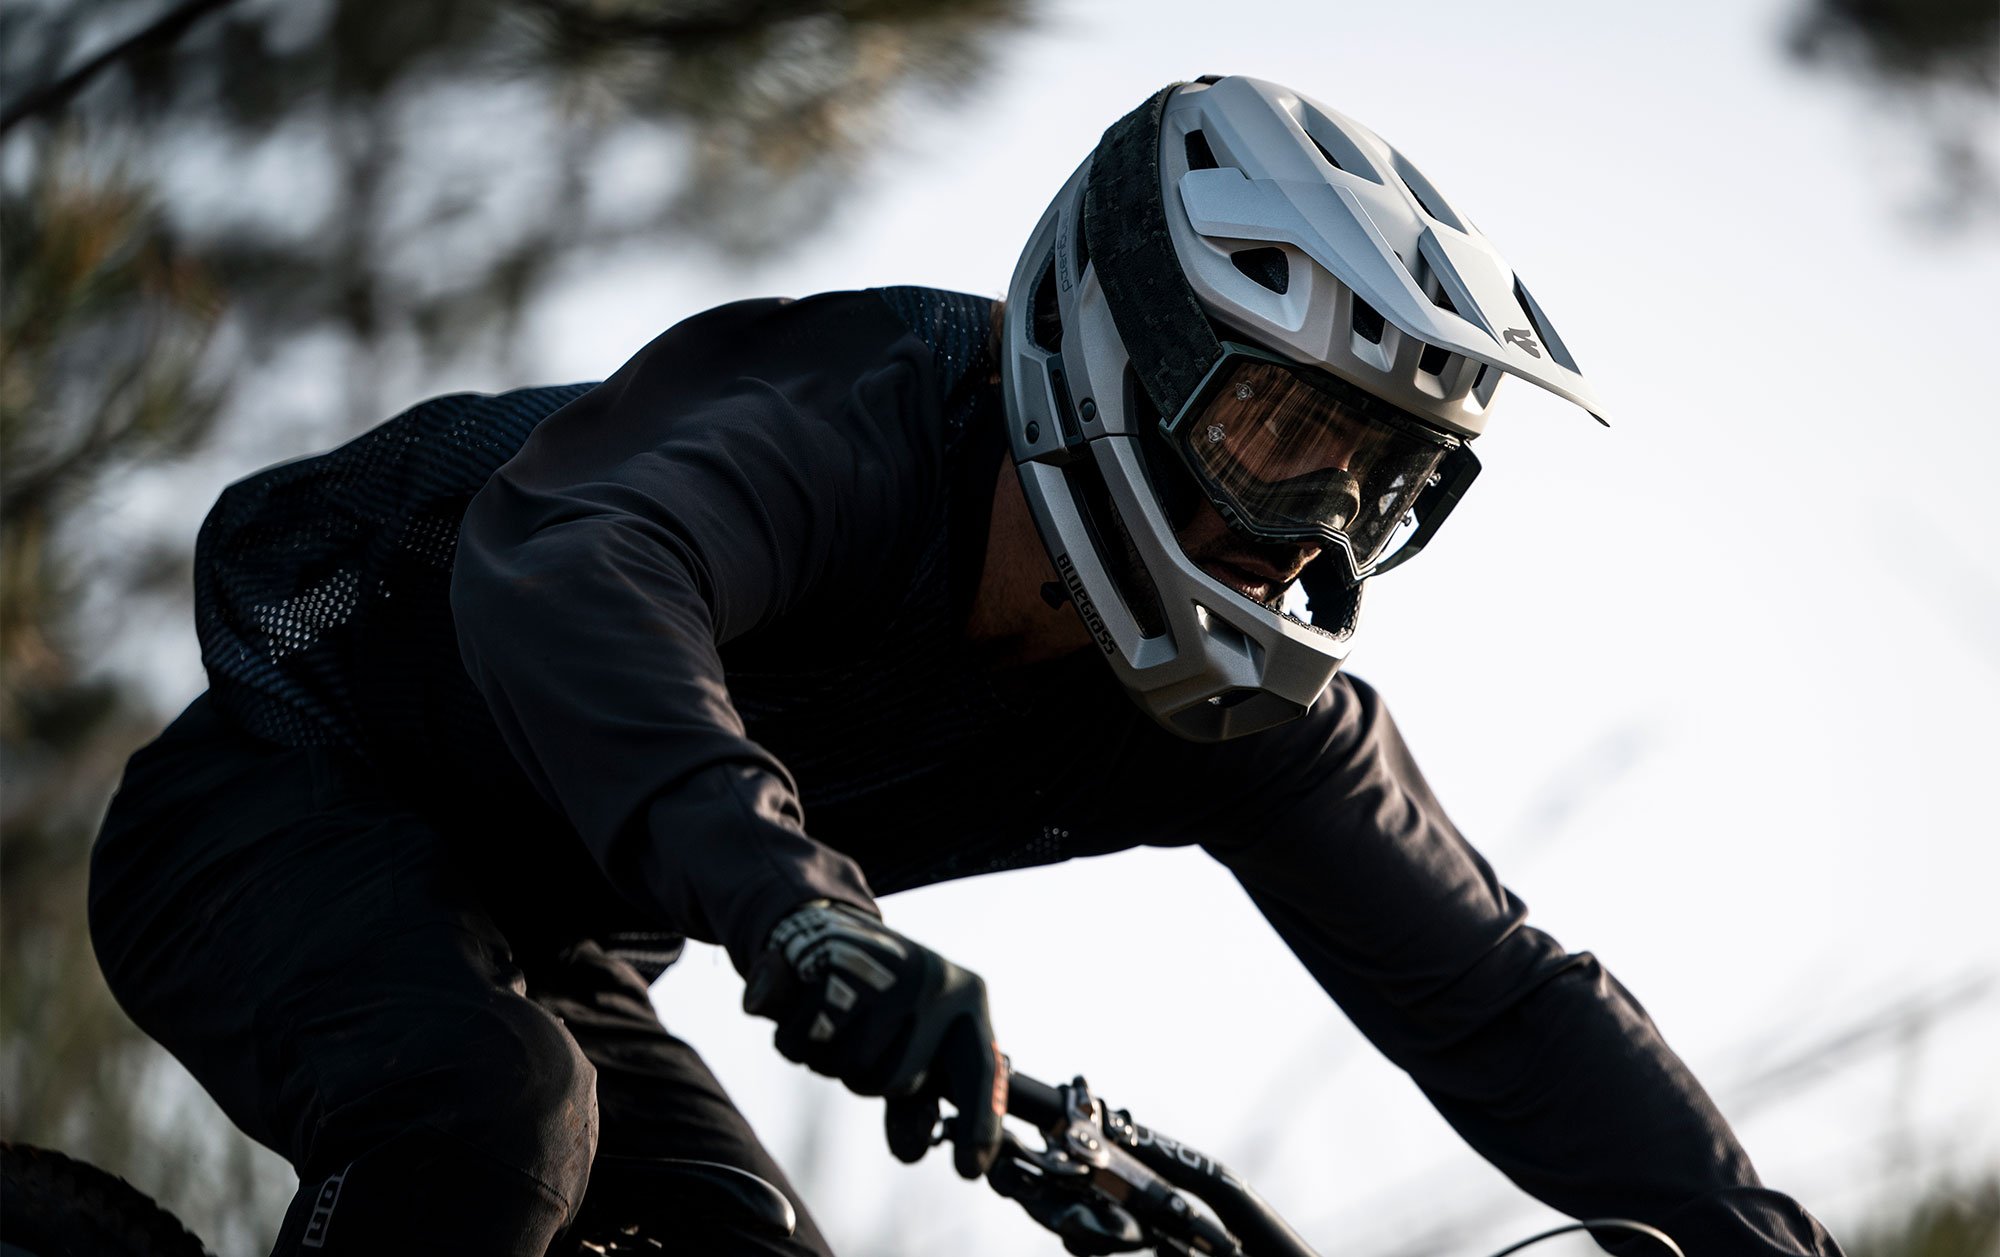 Bluegrass Vanguard is a Full-Face MTB Helmet designed for Enduro, Trail and E-MTB with fixed chin guard